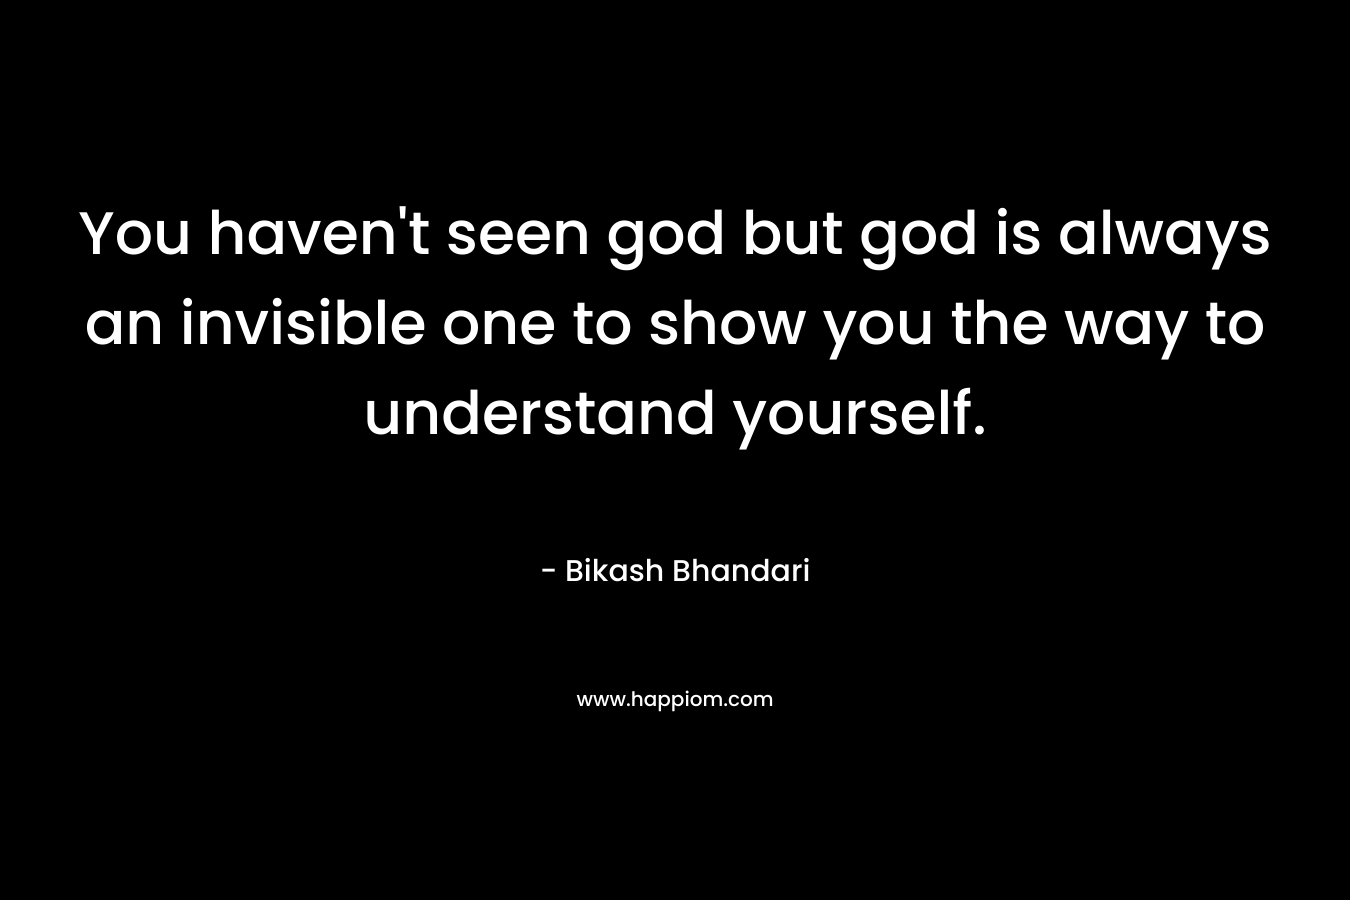 You haven’t seen god but god is always an invisible one to show you the way to understand yourself. – Bikash Bhandari